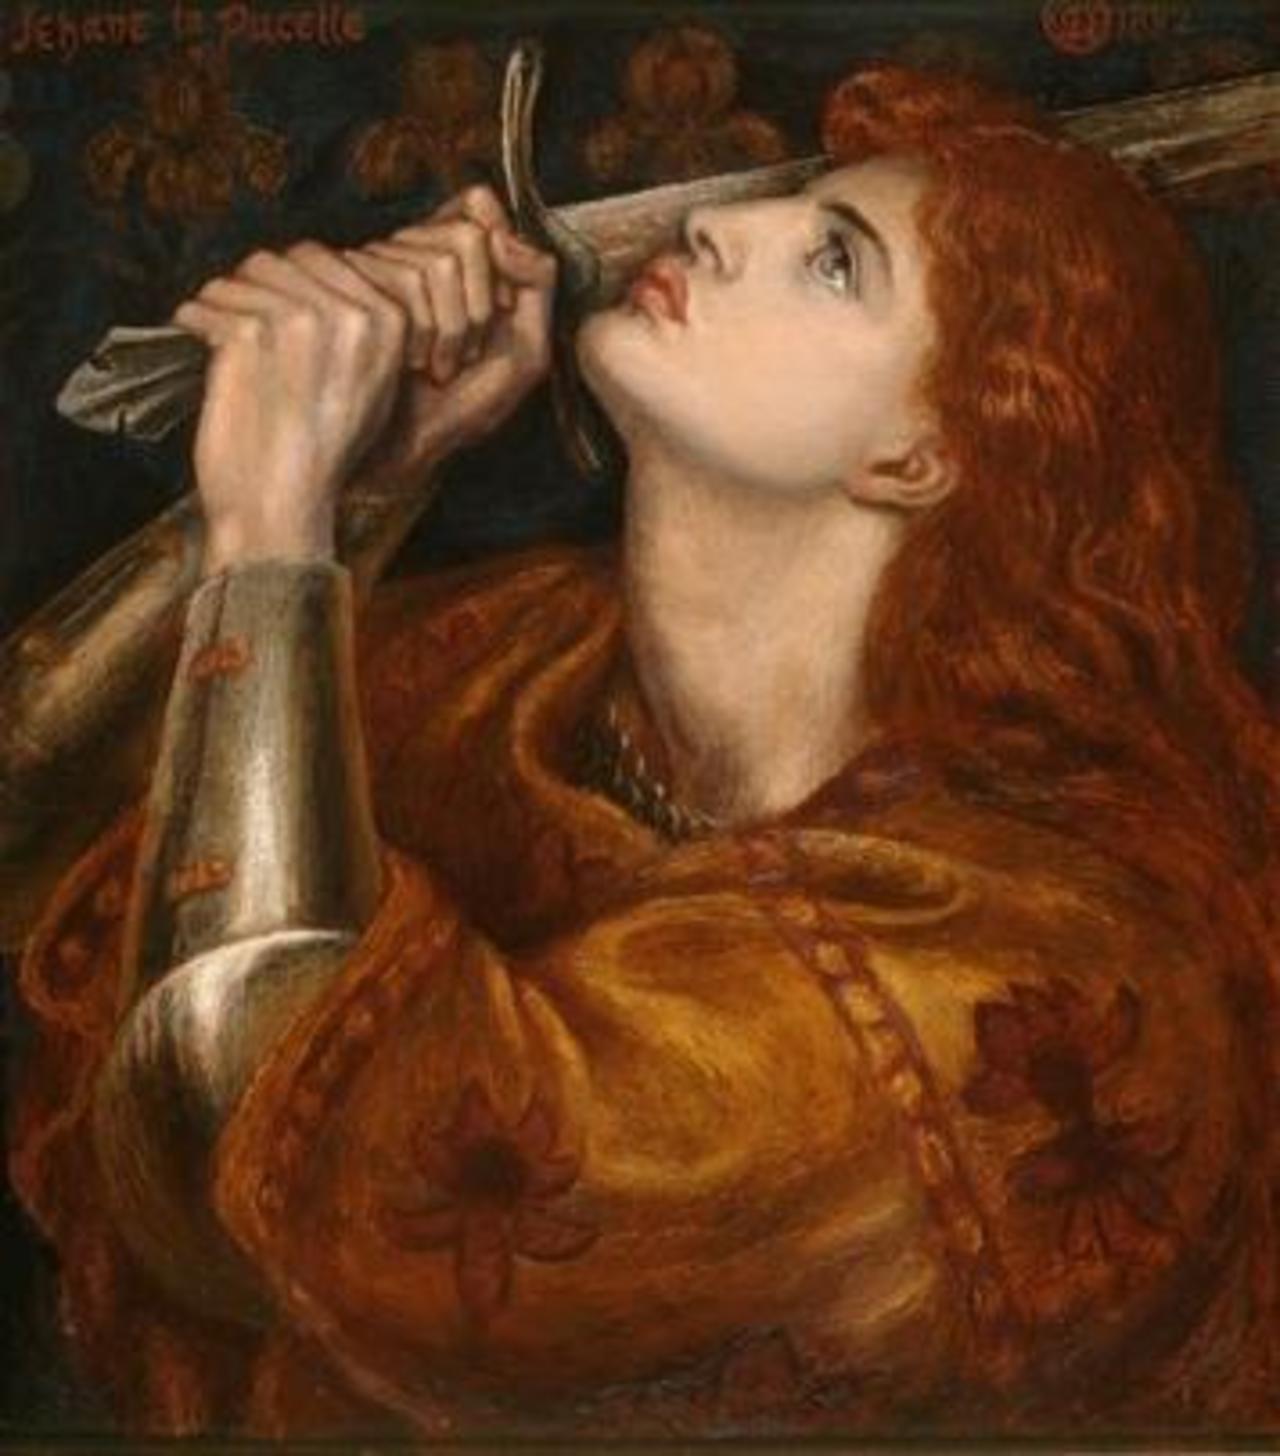 This painting of Joan of Arc was found on Rossetti's easel upon his death in 1882: http://bit.ly/1Ao24VK #art http://t.co/kYxsVjfAer